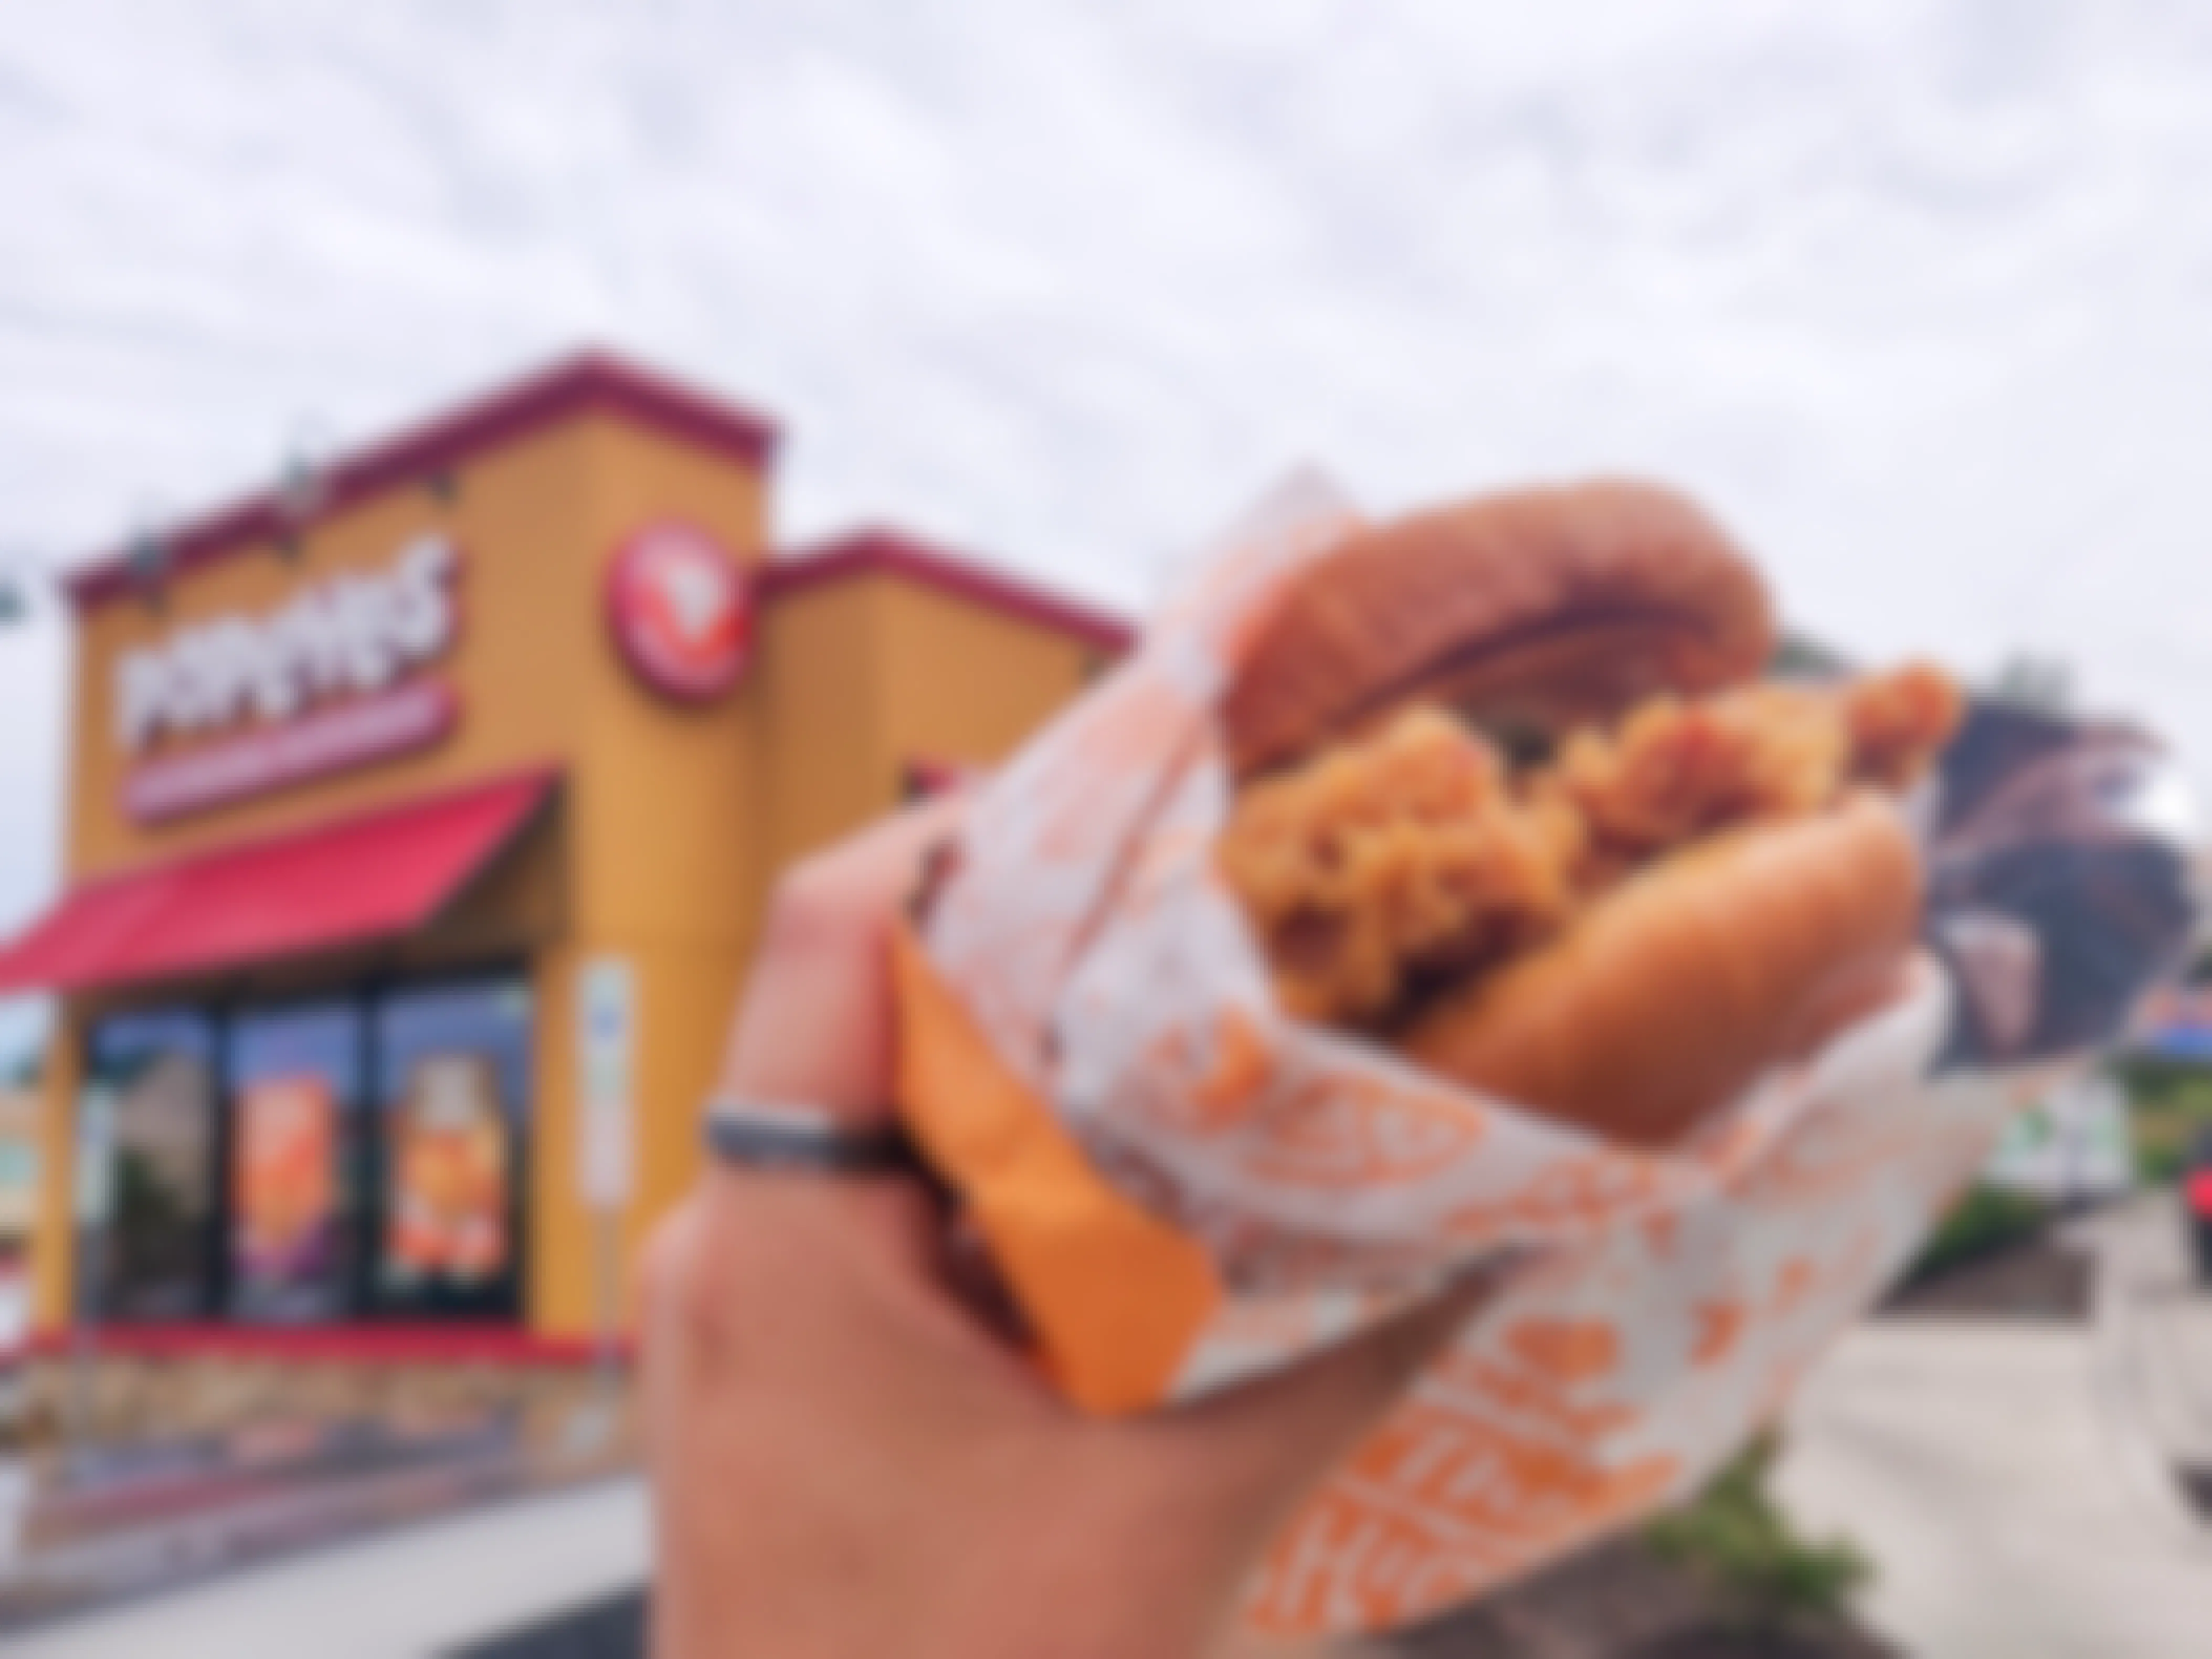 A person's hand holding a Popeyes chicken sandwich with a Popeyes restaurant in the background on National Sandwich Day.